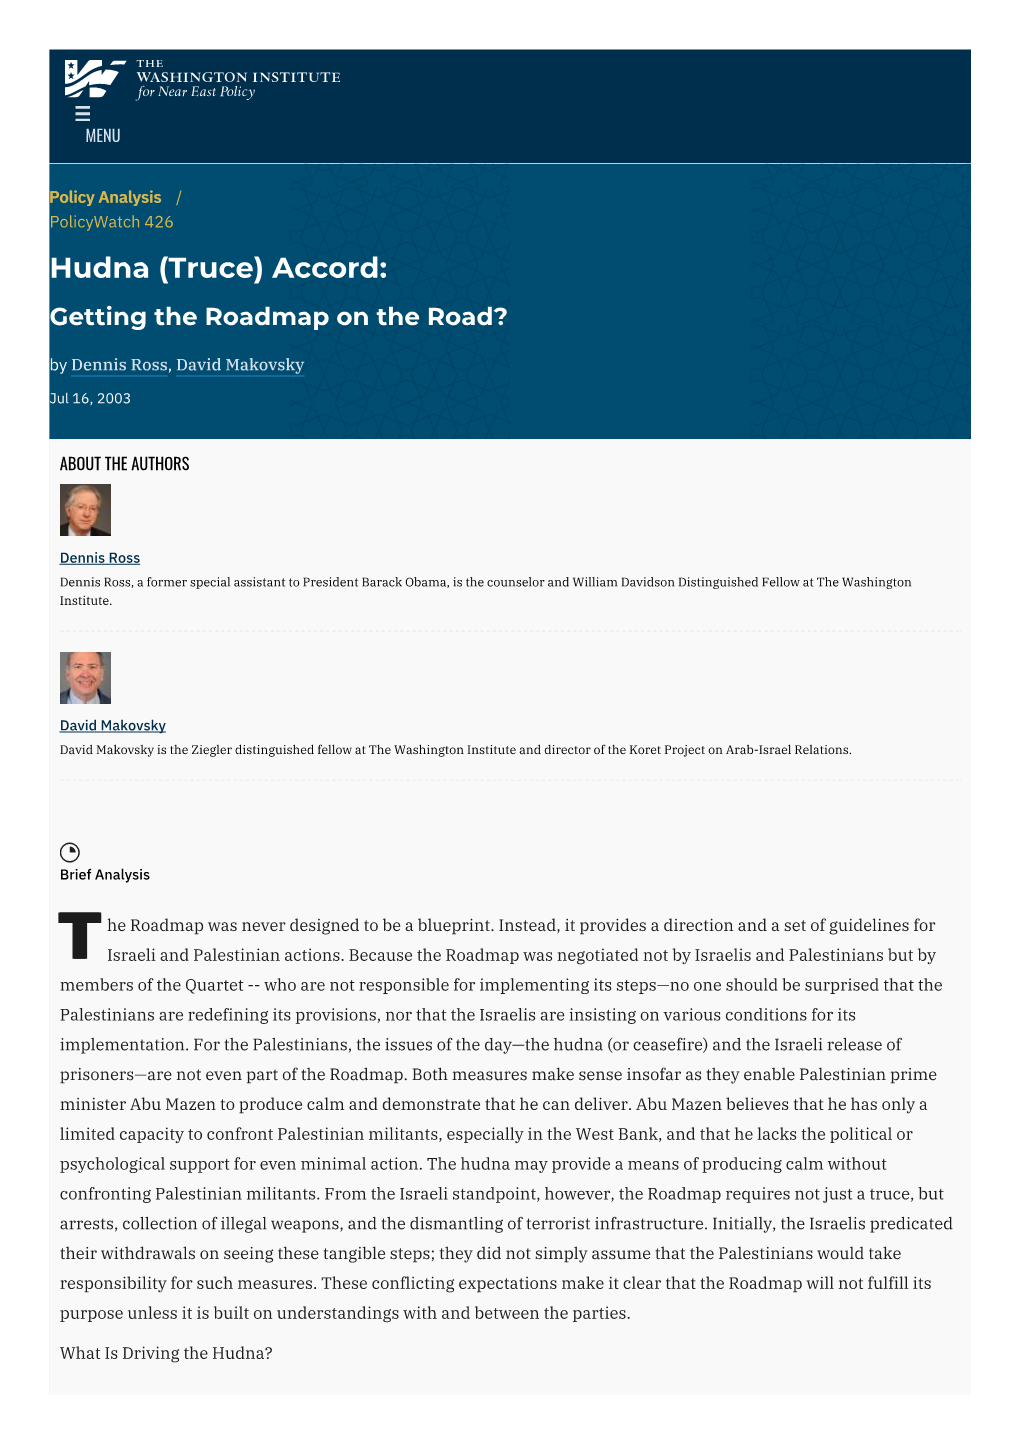 Hudna (Truce) Accord: Getting the Roadmap on the Road? by Dennis Ross, David Makovsky